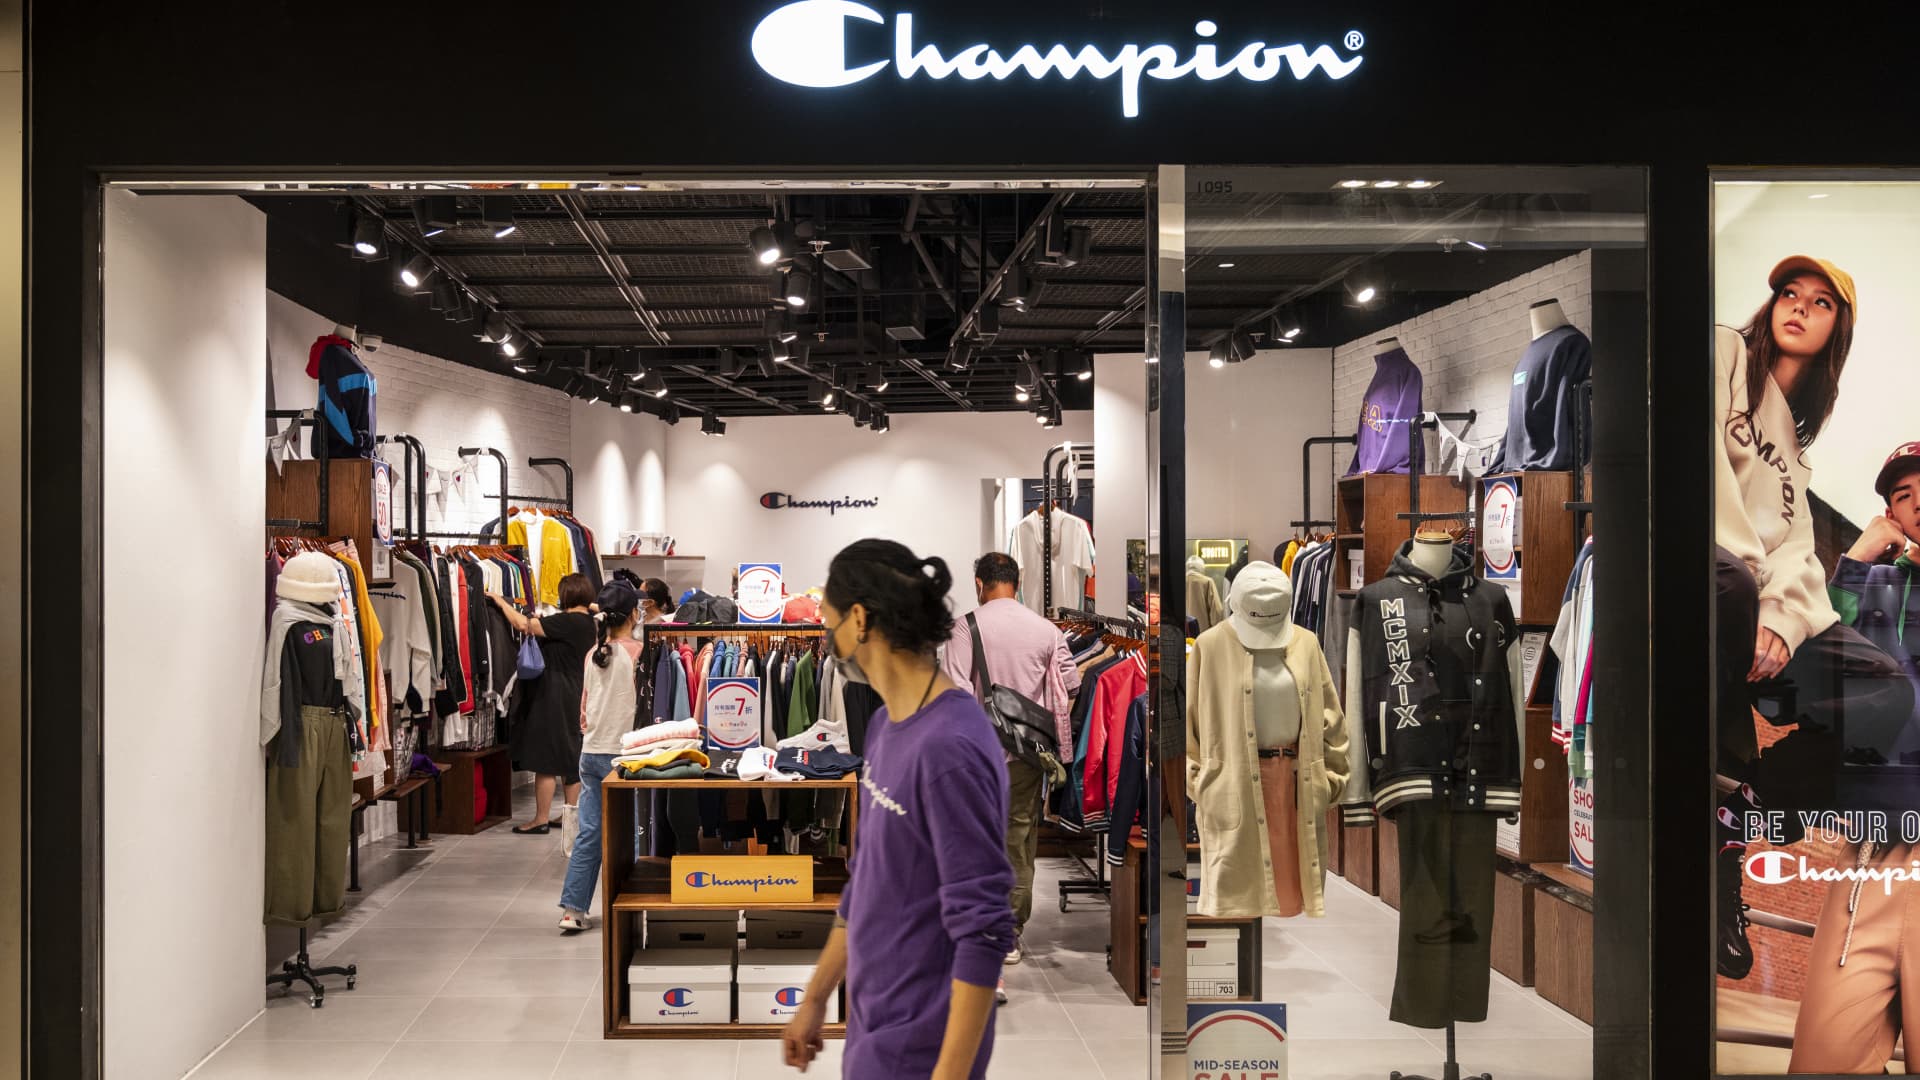 Hanesbrands to sell Champion brand to Authentic Brands in $1.2 billion deal